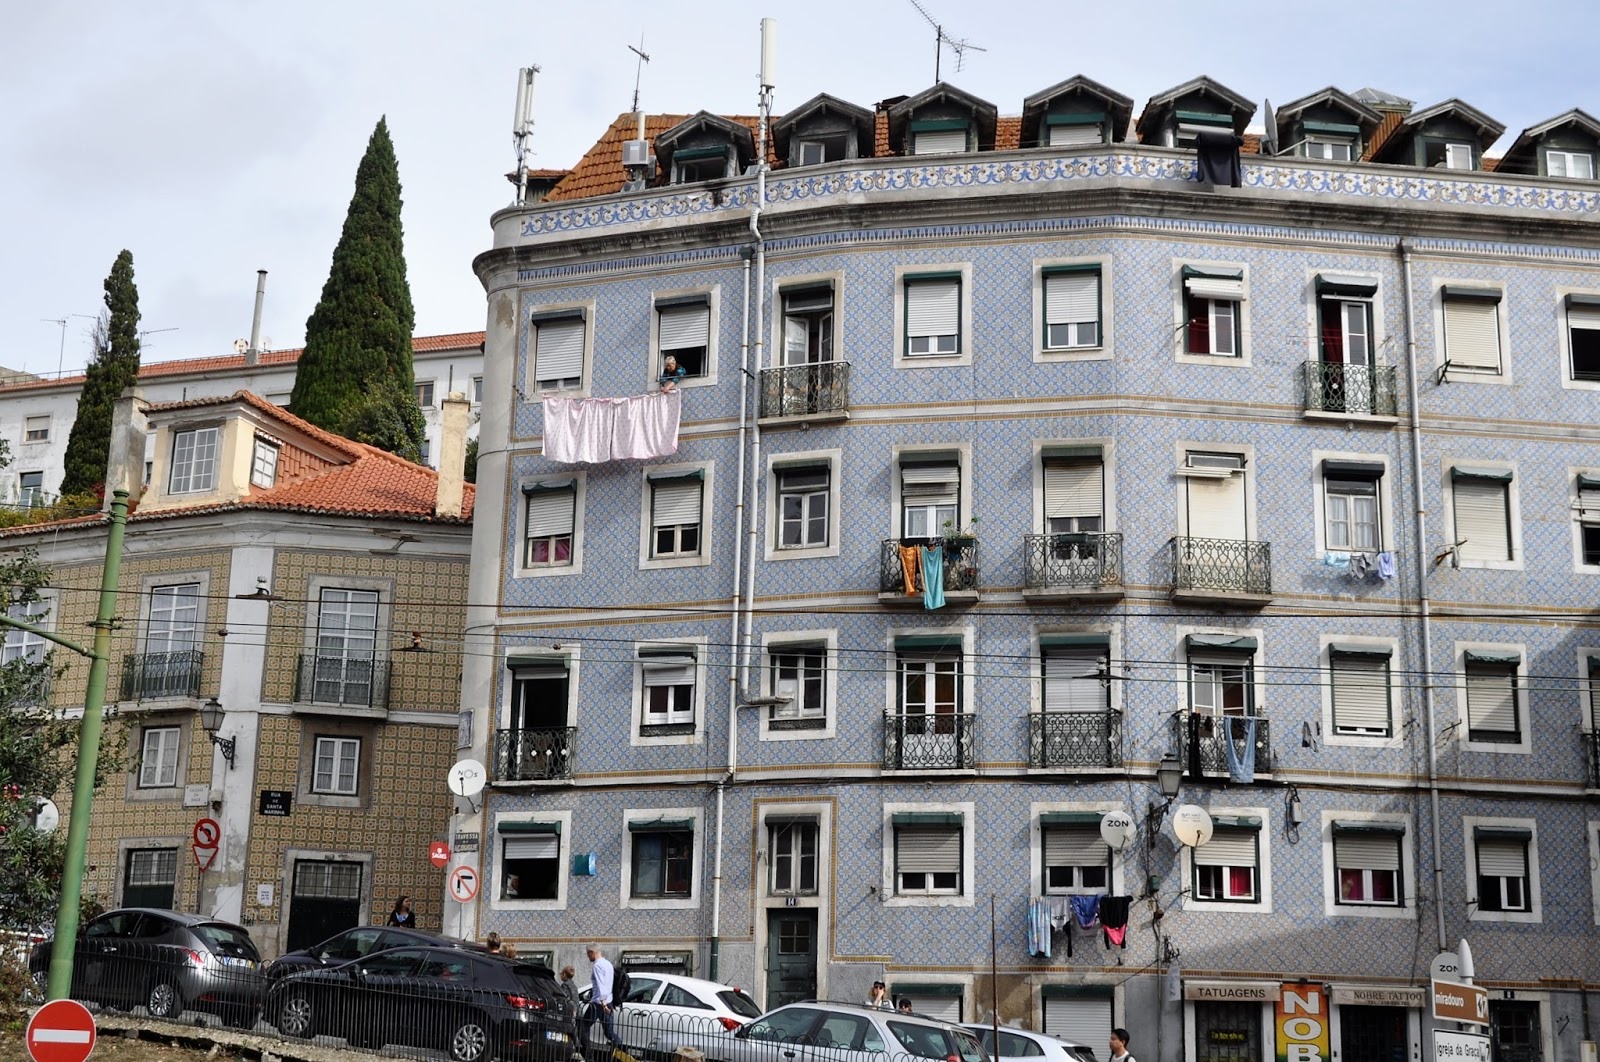 8 Great Discoveries in Lisbon, photo by Modern Bric a Brac